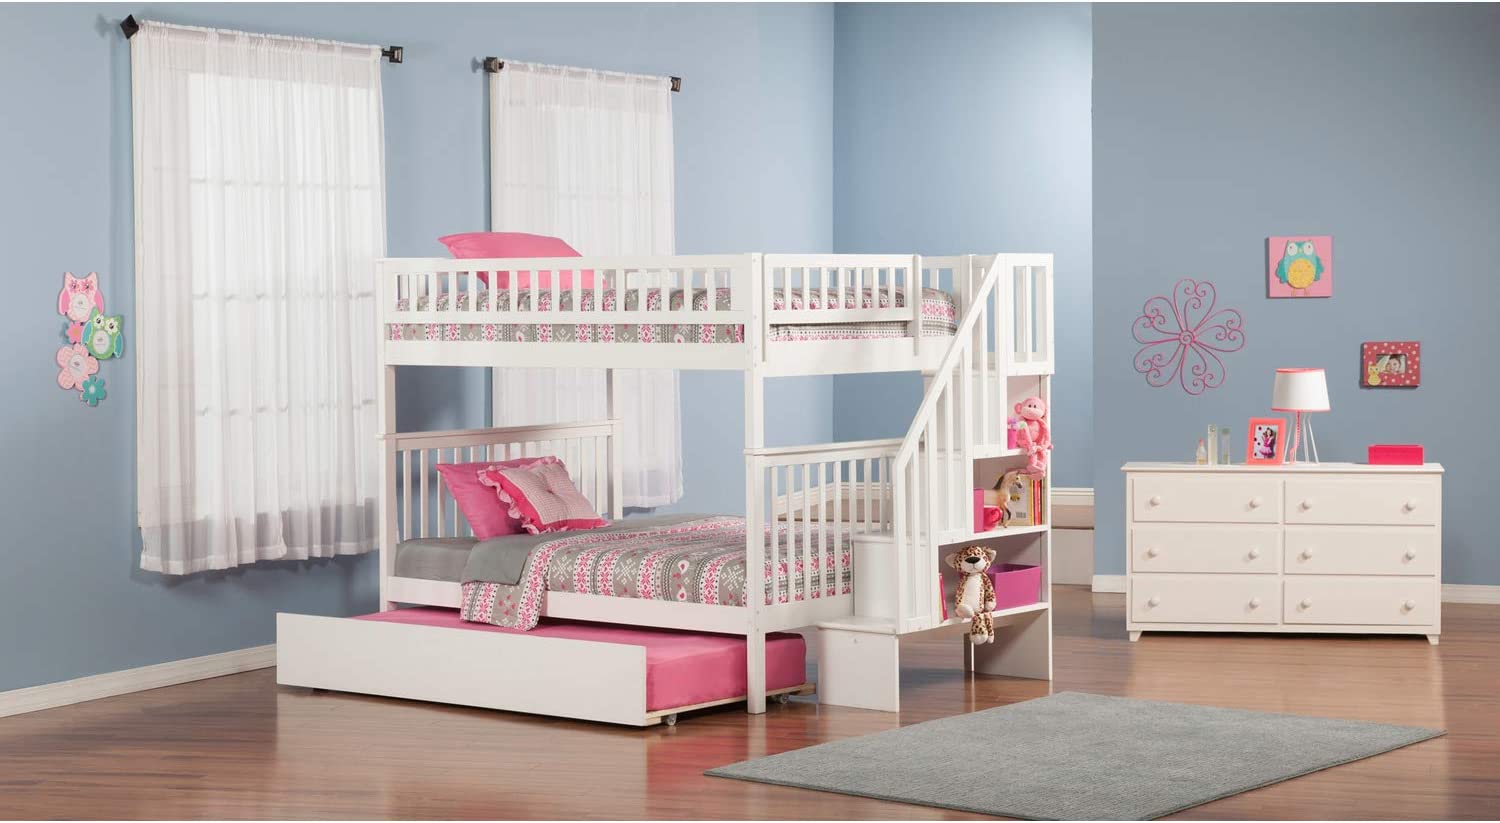 Atlantic Furniture Woodland Staircase Bunk Bed Full Over Full with Full Size Urban Trundle Bed in White